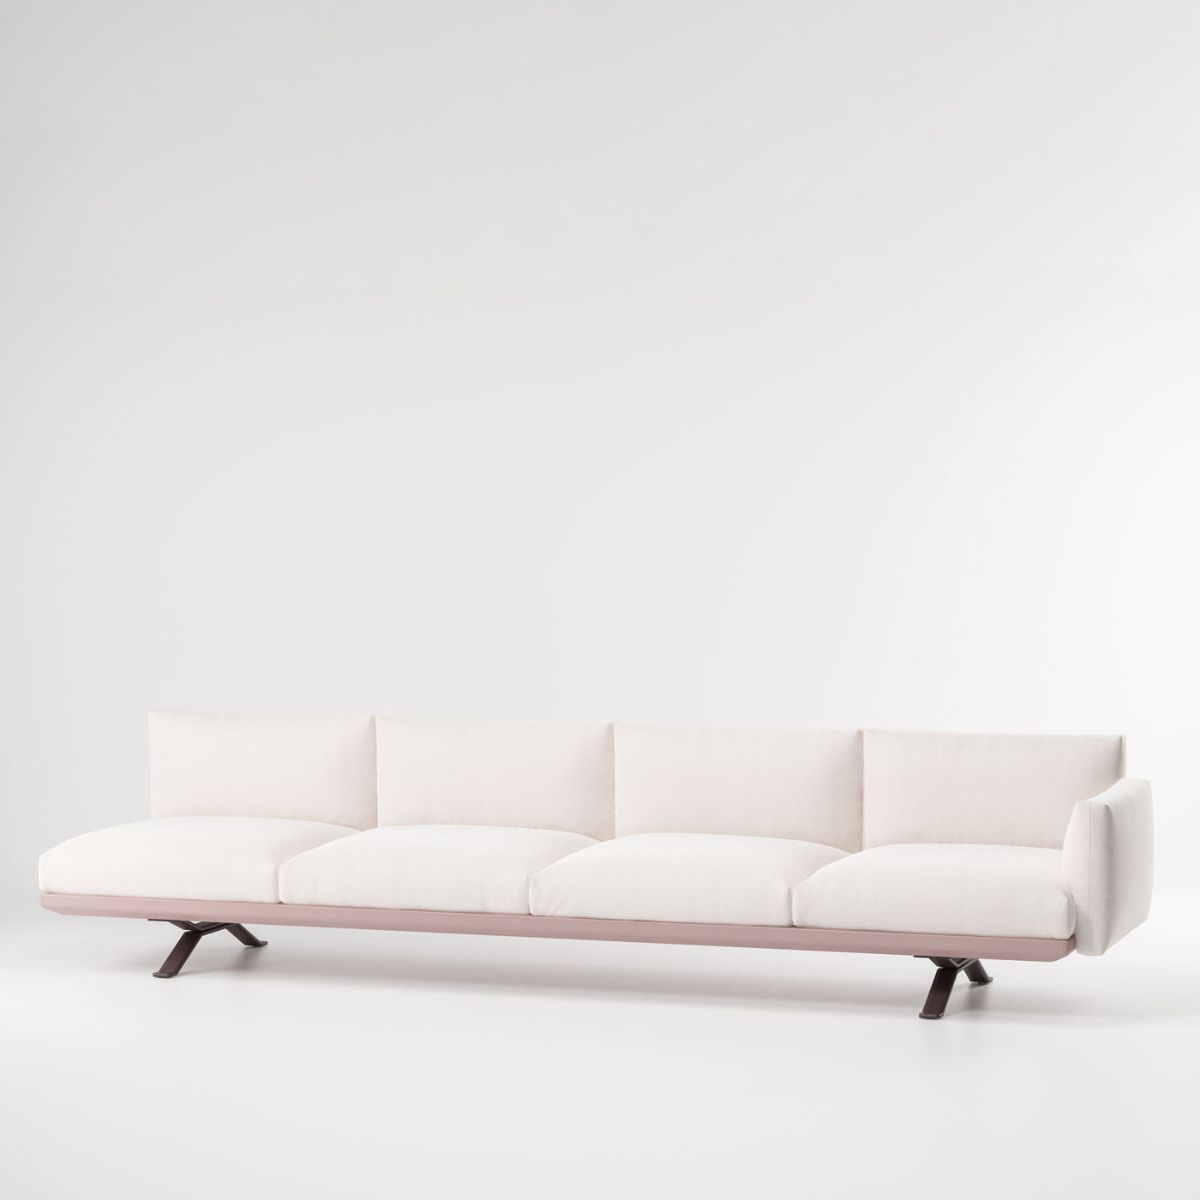 Kettal Boma Right Corner 4-Seater "End"